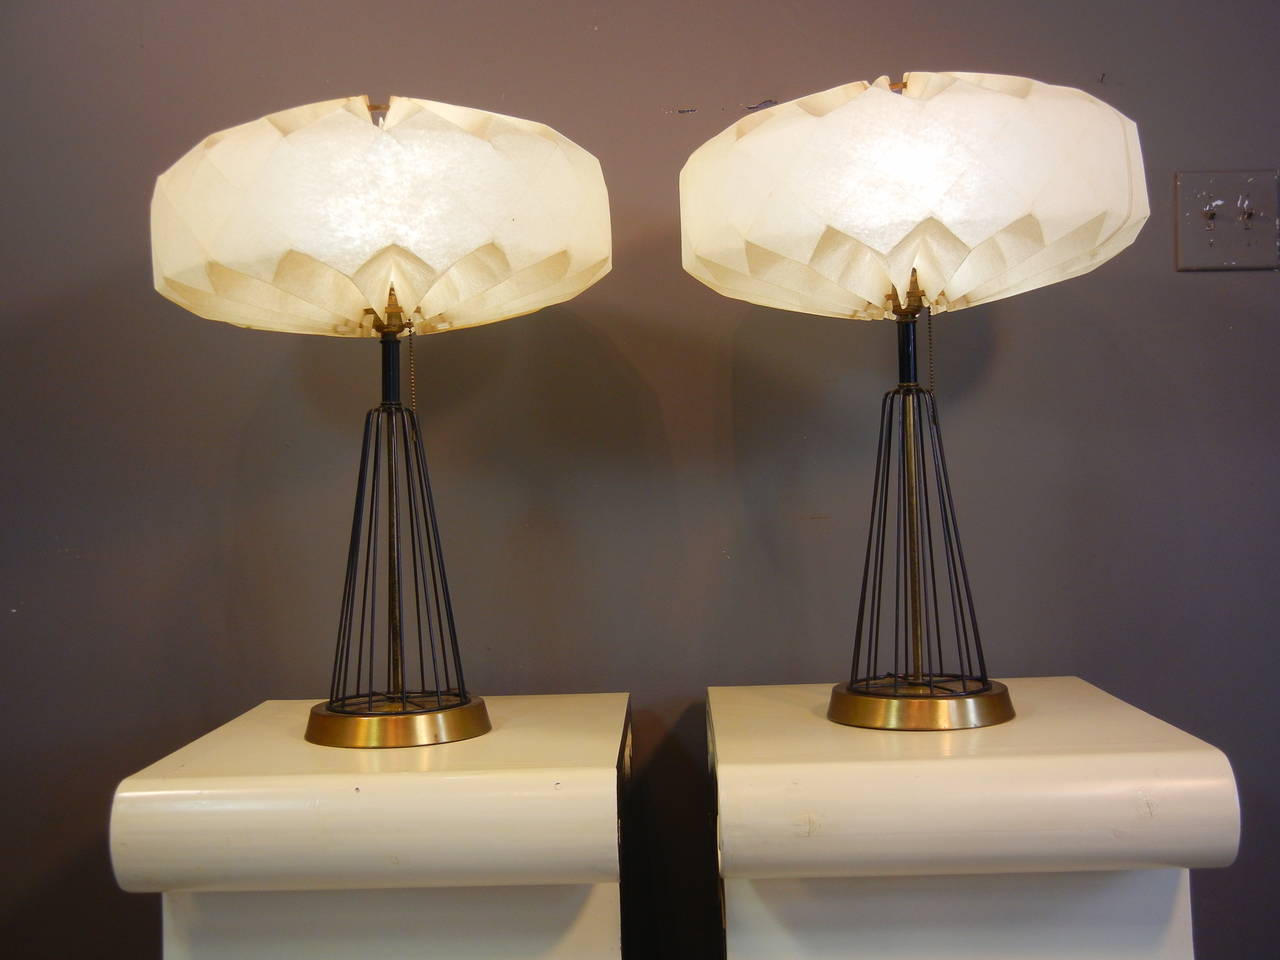 This pair of futuristic table lamps have round brass basses, shafts of black iron rods in an upside-down cone configuration, and Fiberglass flying saucer-shaped shades.

The shades are pleated top and bottom where they are attached to brass rings,